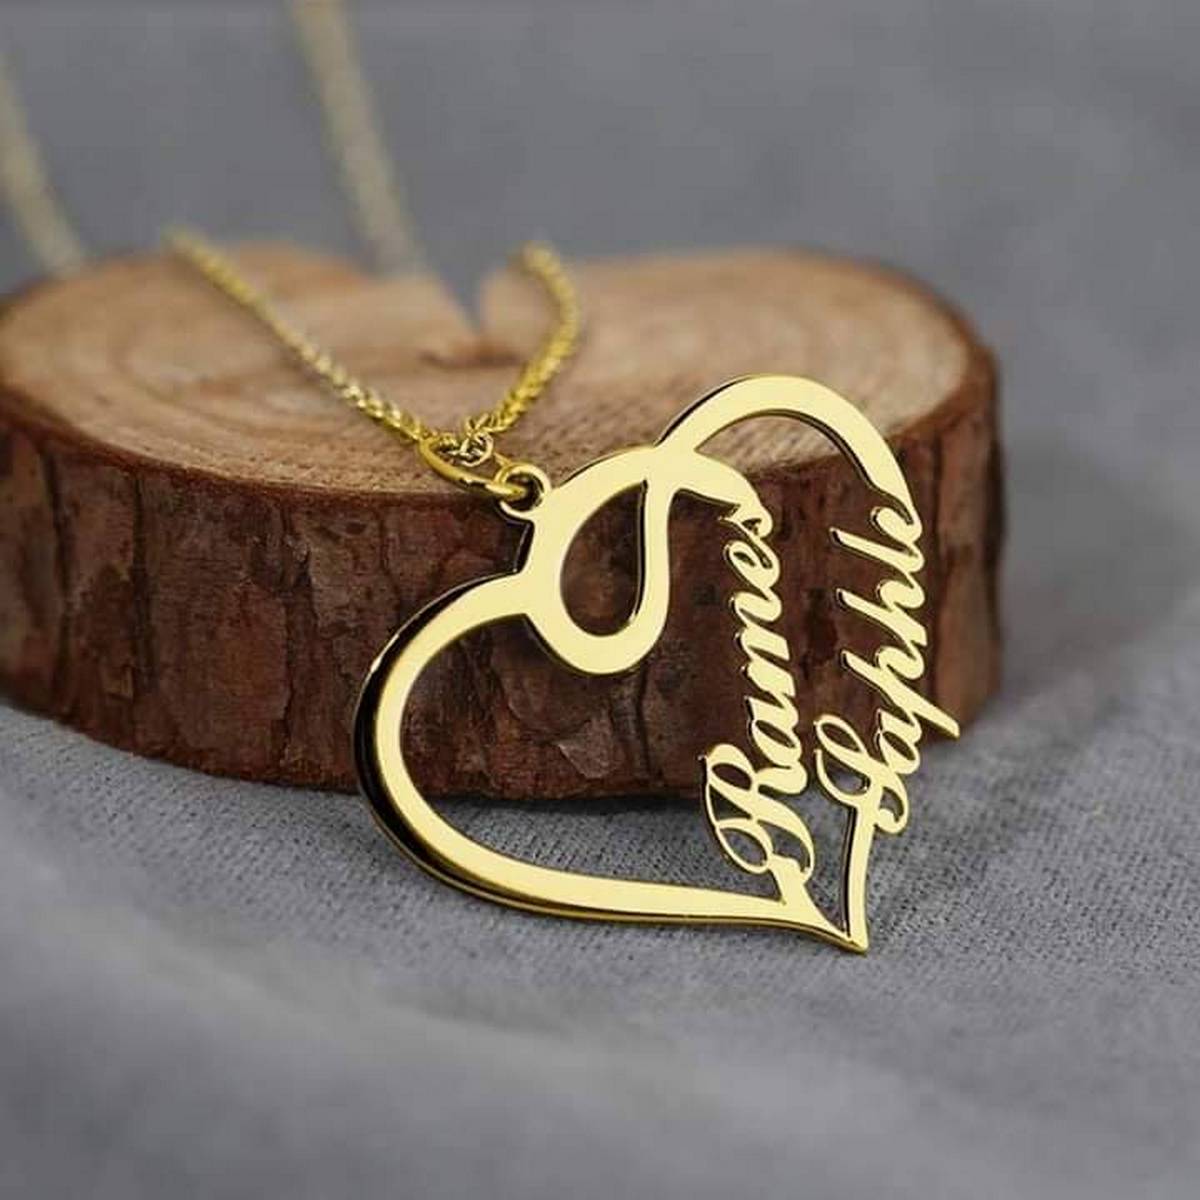 Customized Heart Shape Double Name Locket Buy Online At Best Prices In Pakistan Daraz Pk